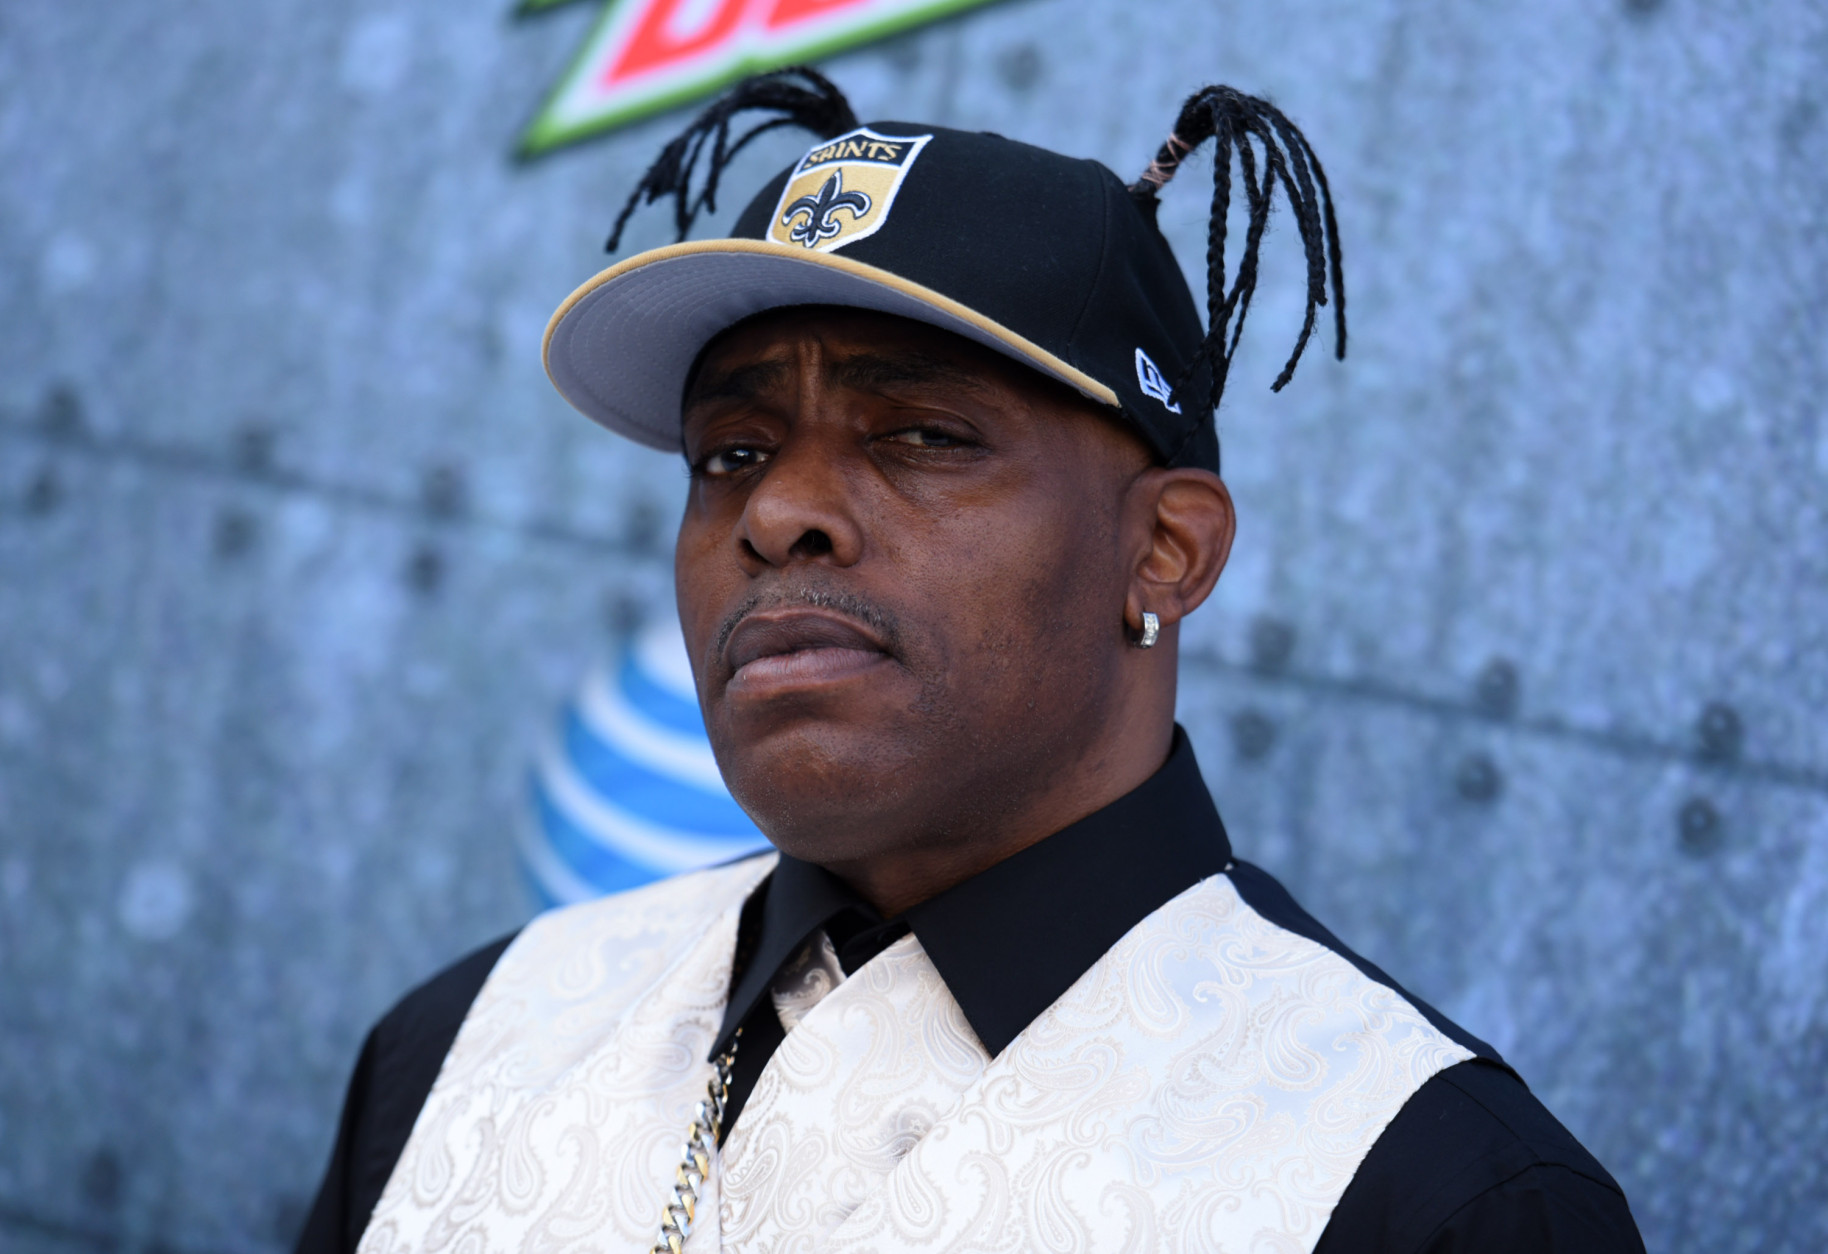 Coolio attends the 2015 Spike TV's Guys Choice Awards at Sony Studios on Saturday, June 6, 2015, in Culver City, Calif. (Photo by Richard Shotwell/Invision/AP)